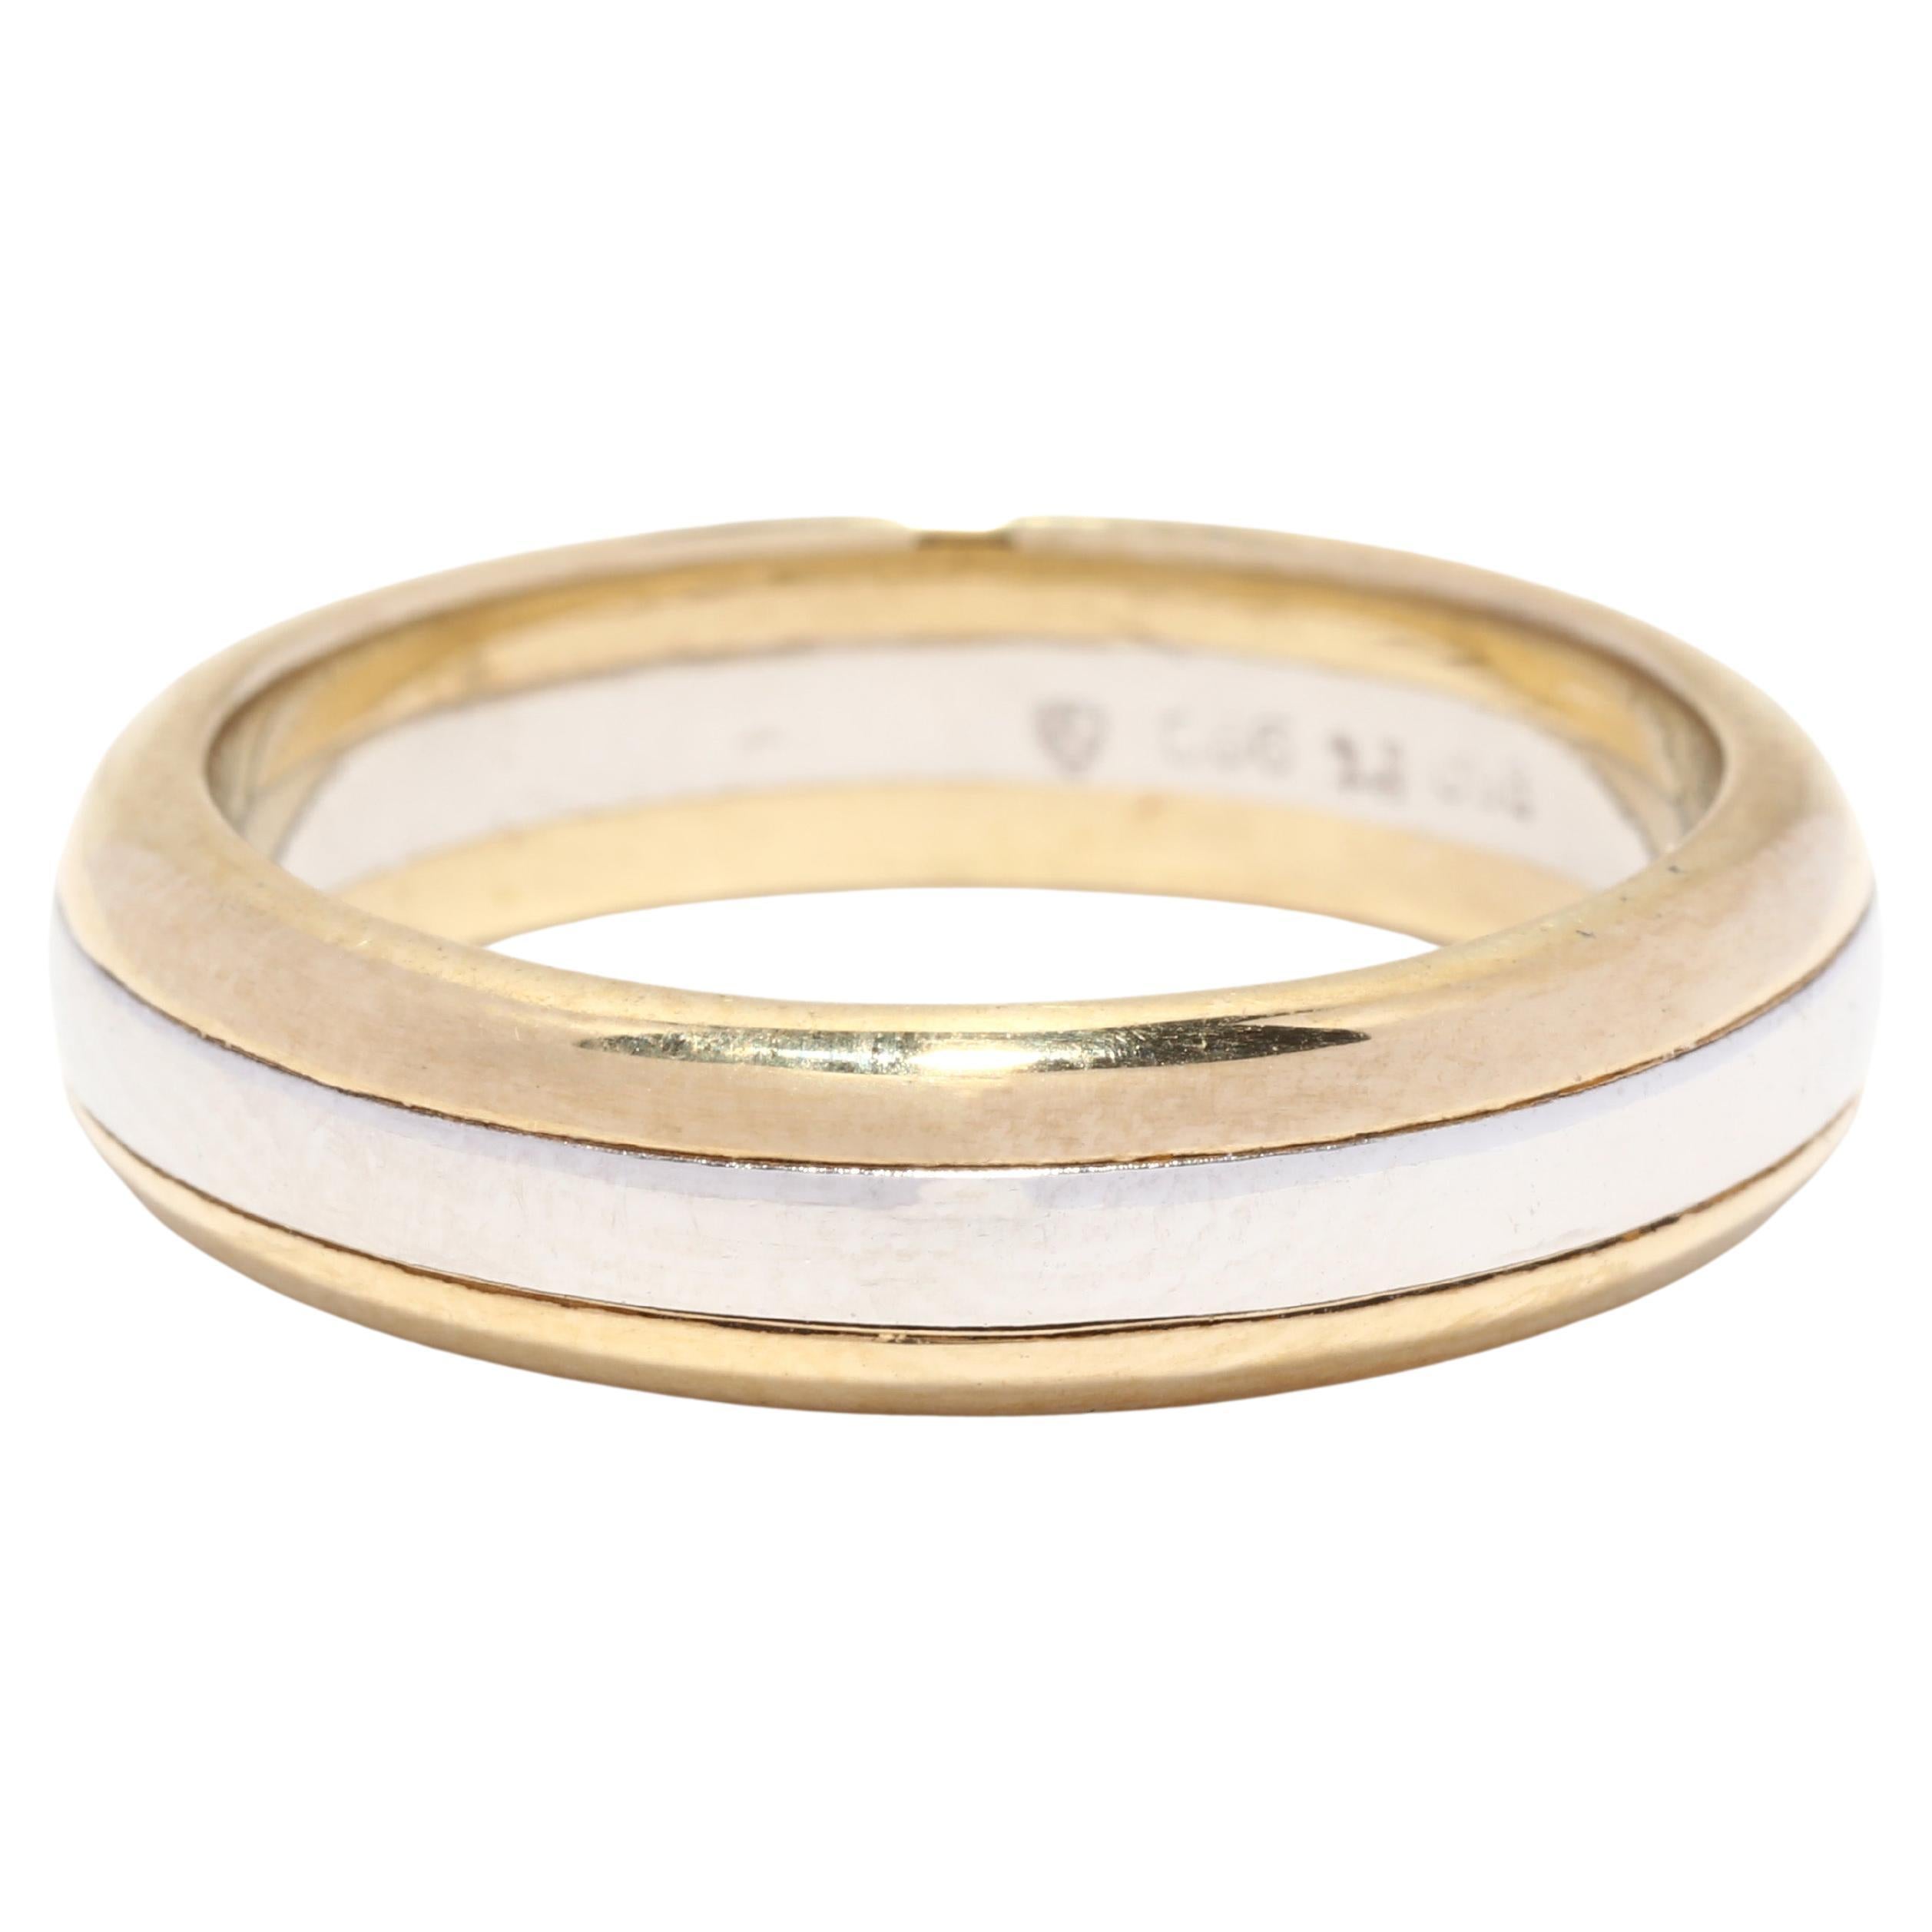 Two Tone Wedding Band, Platinum 14K Yellow Gold, Ring Size 8.75, Stackable